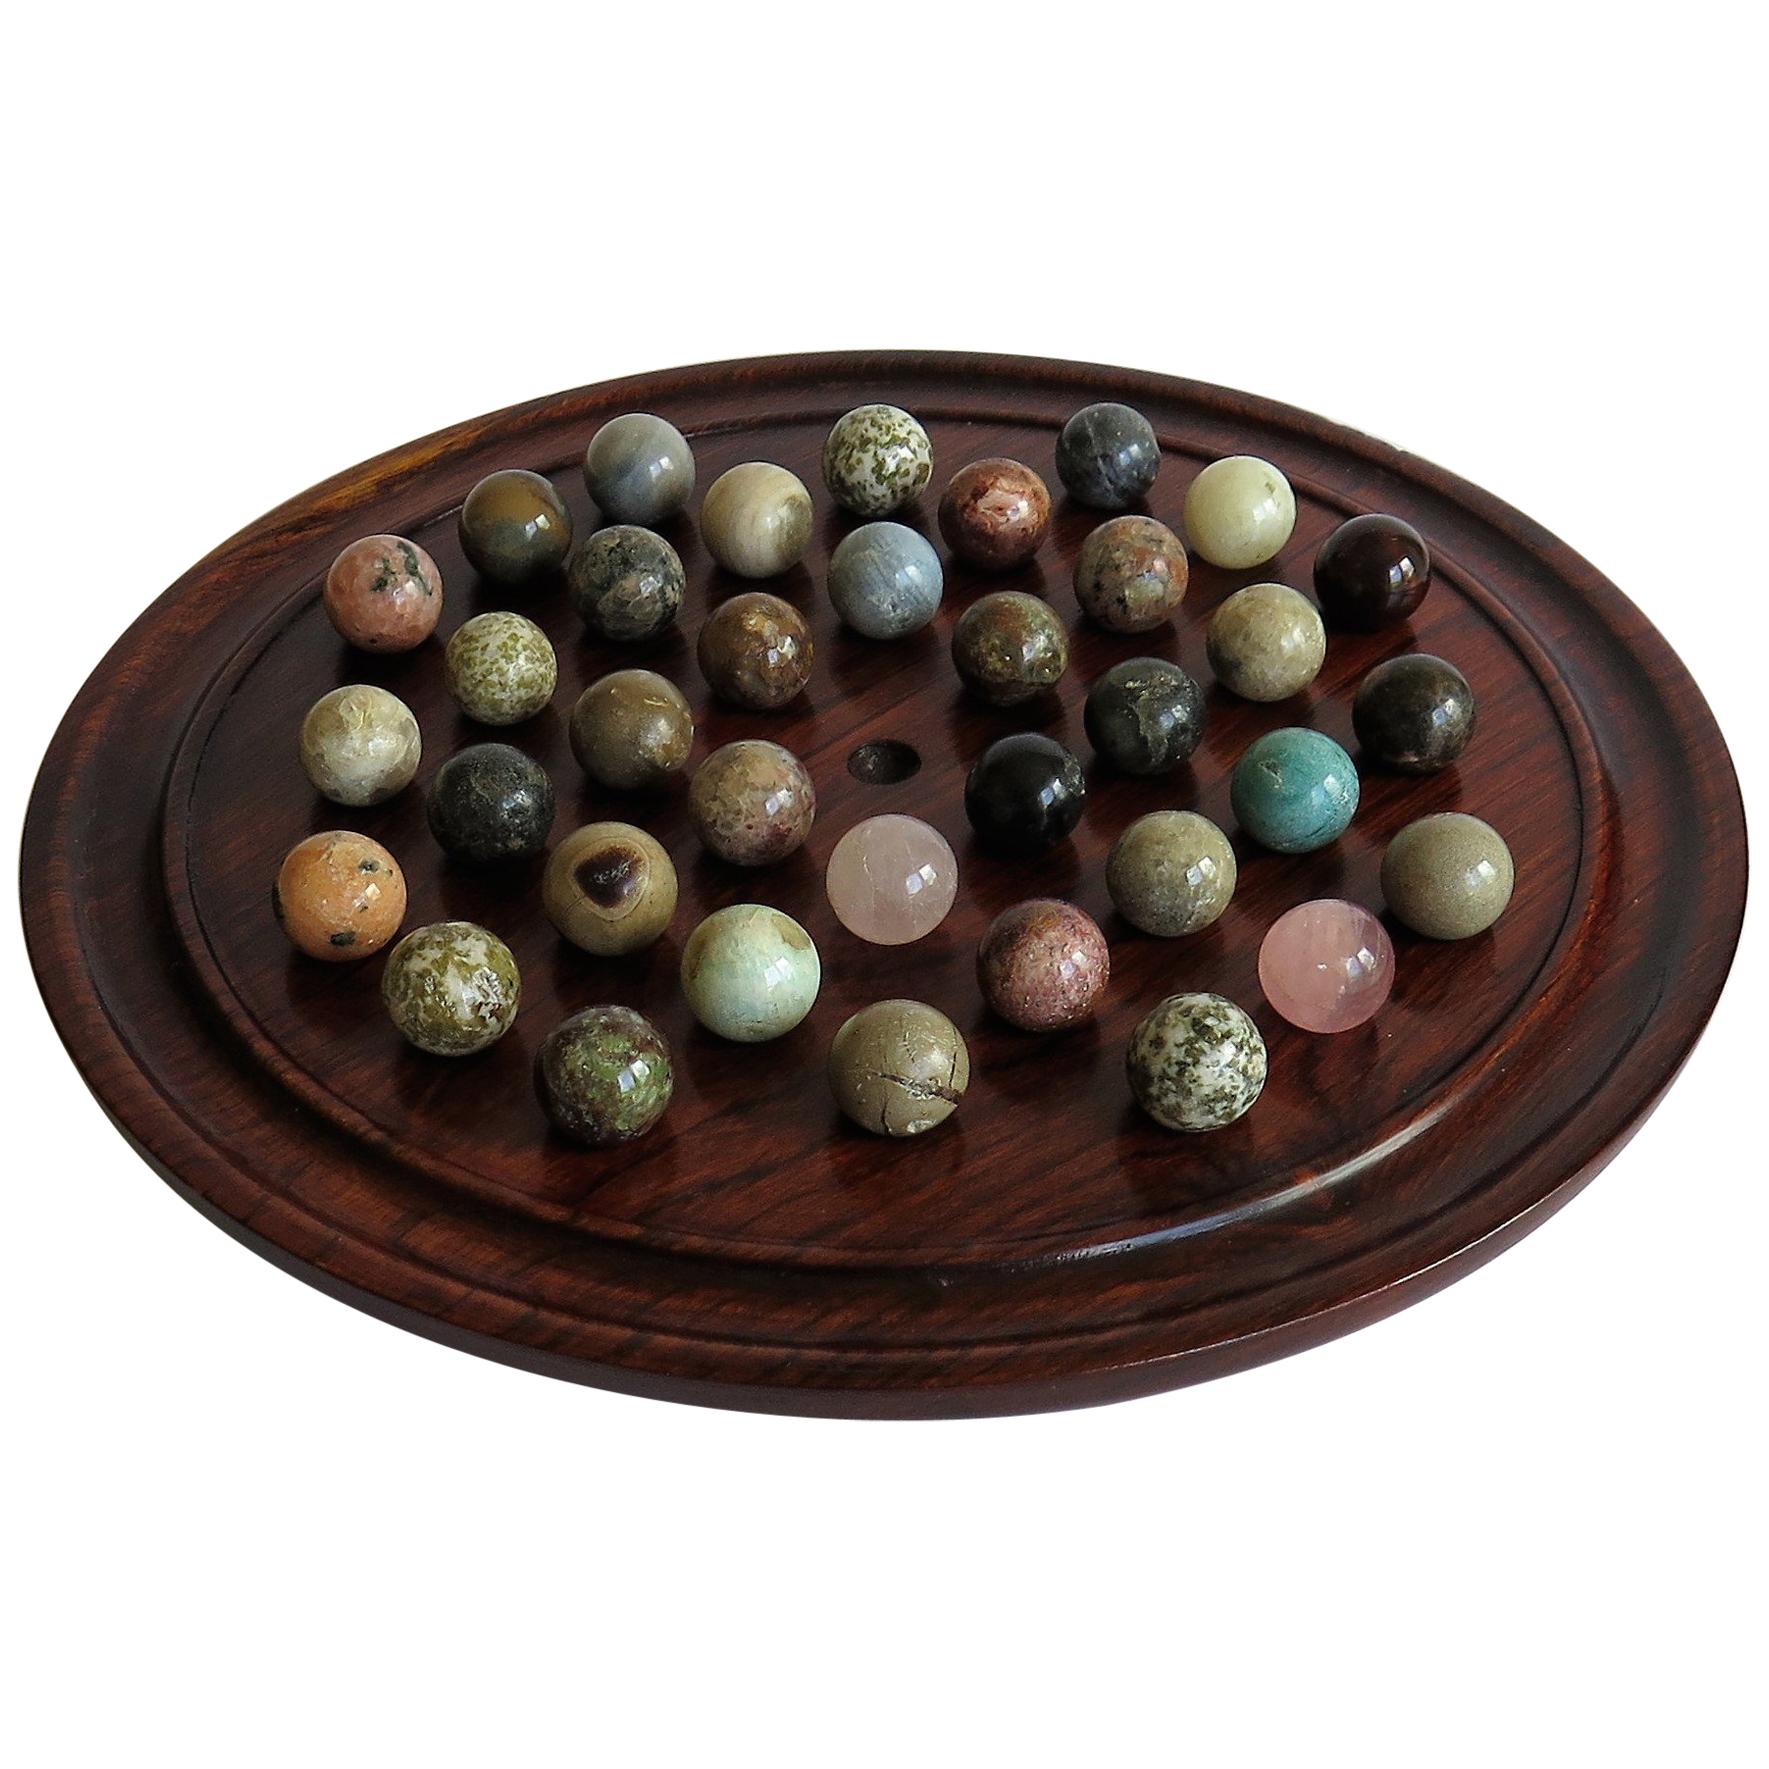 Marble Solitaire Game Polished Hardwood Board 36 Agate Stone Marbles, circa 1915